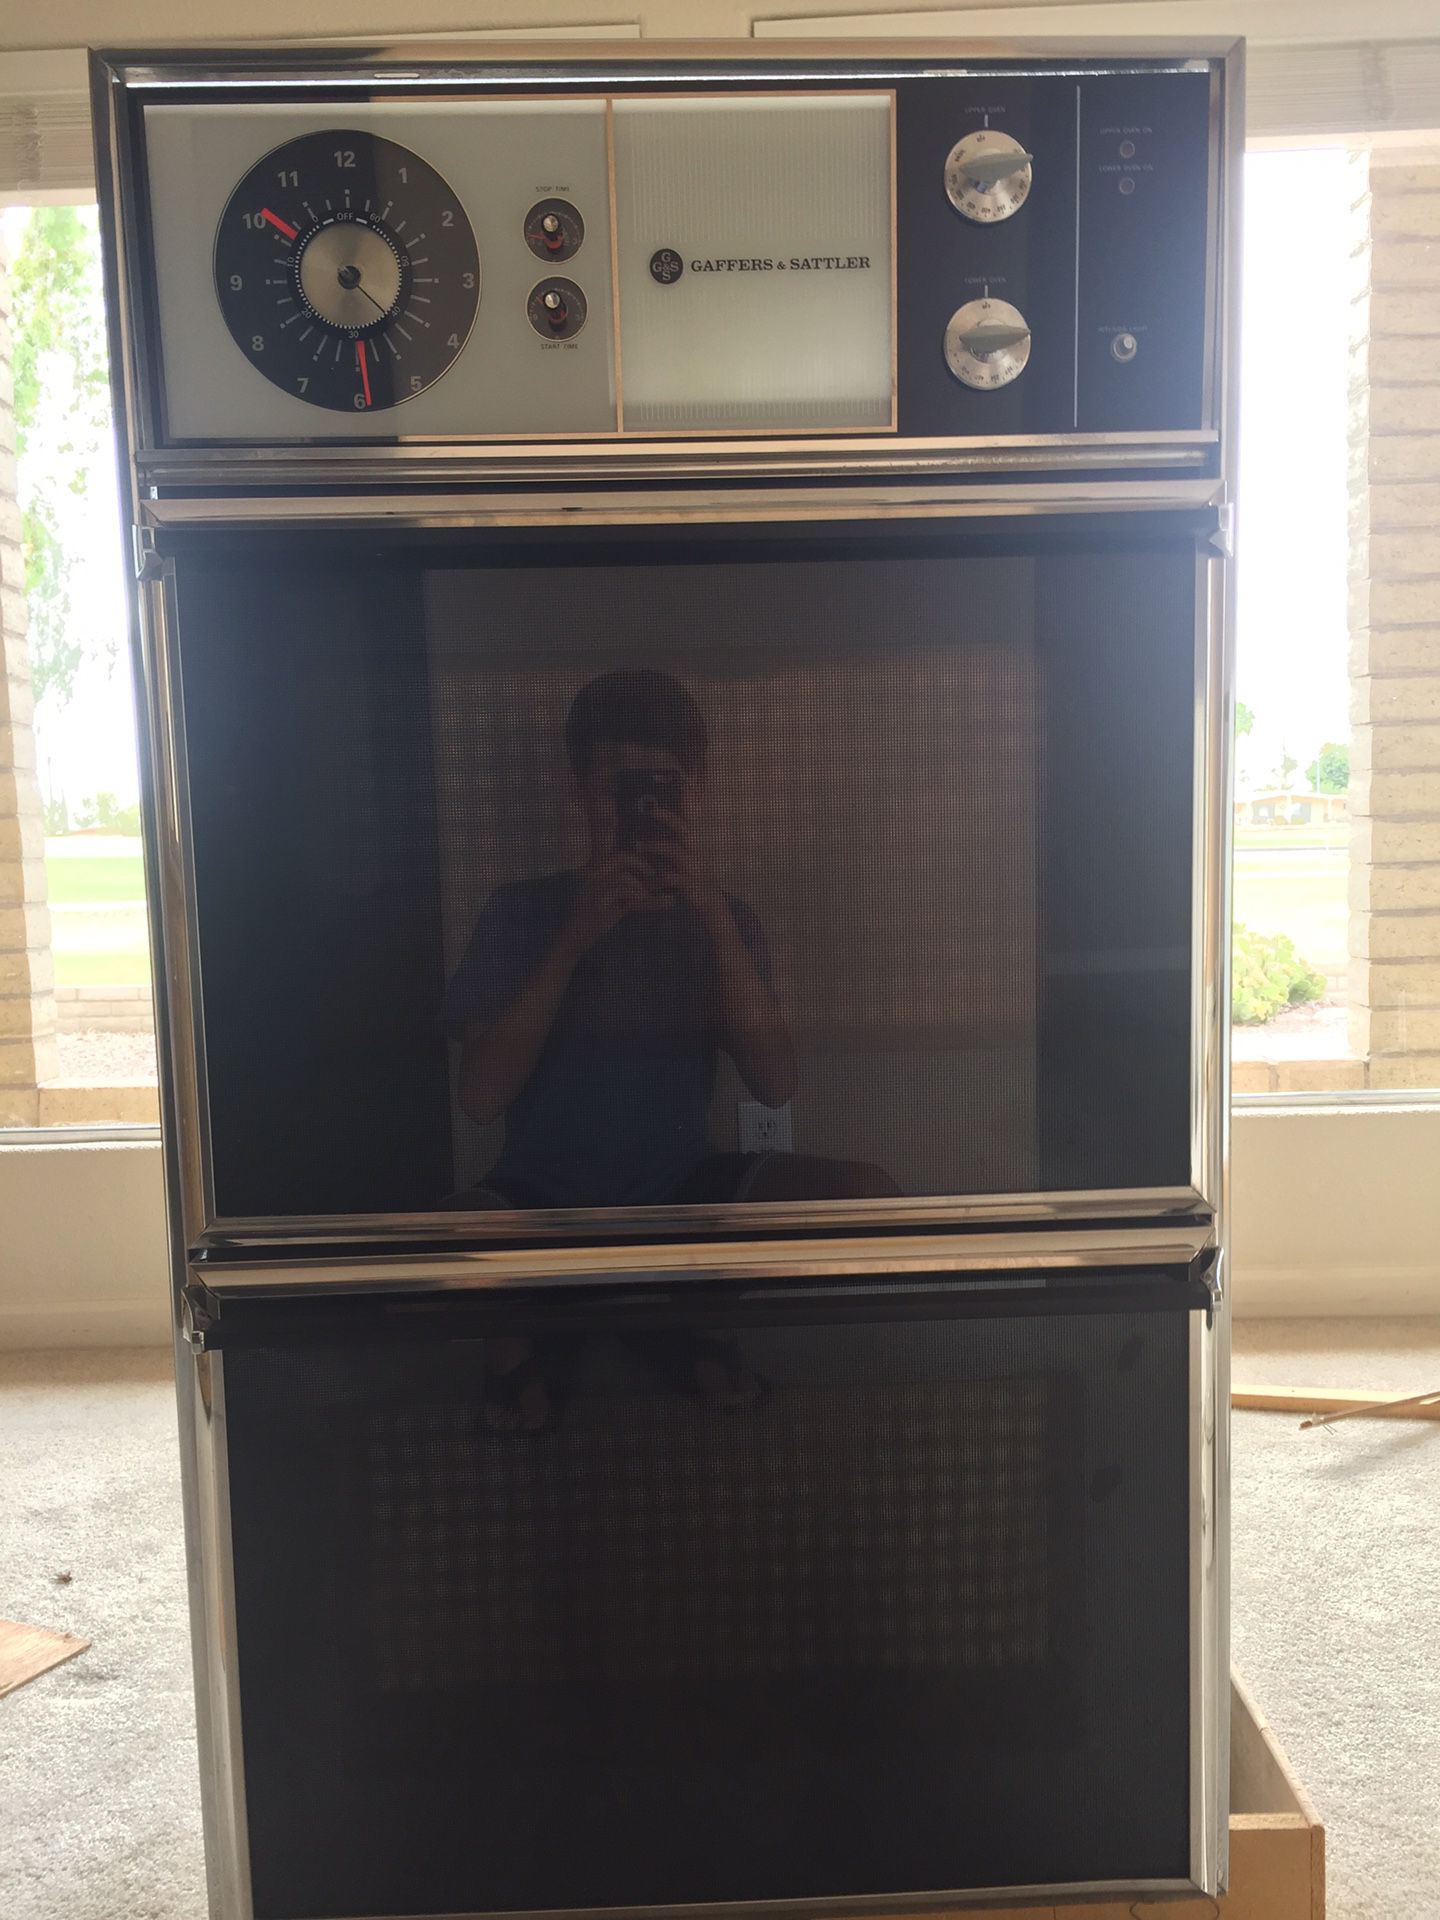 1973 Antique Working Oven